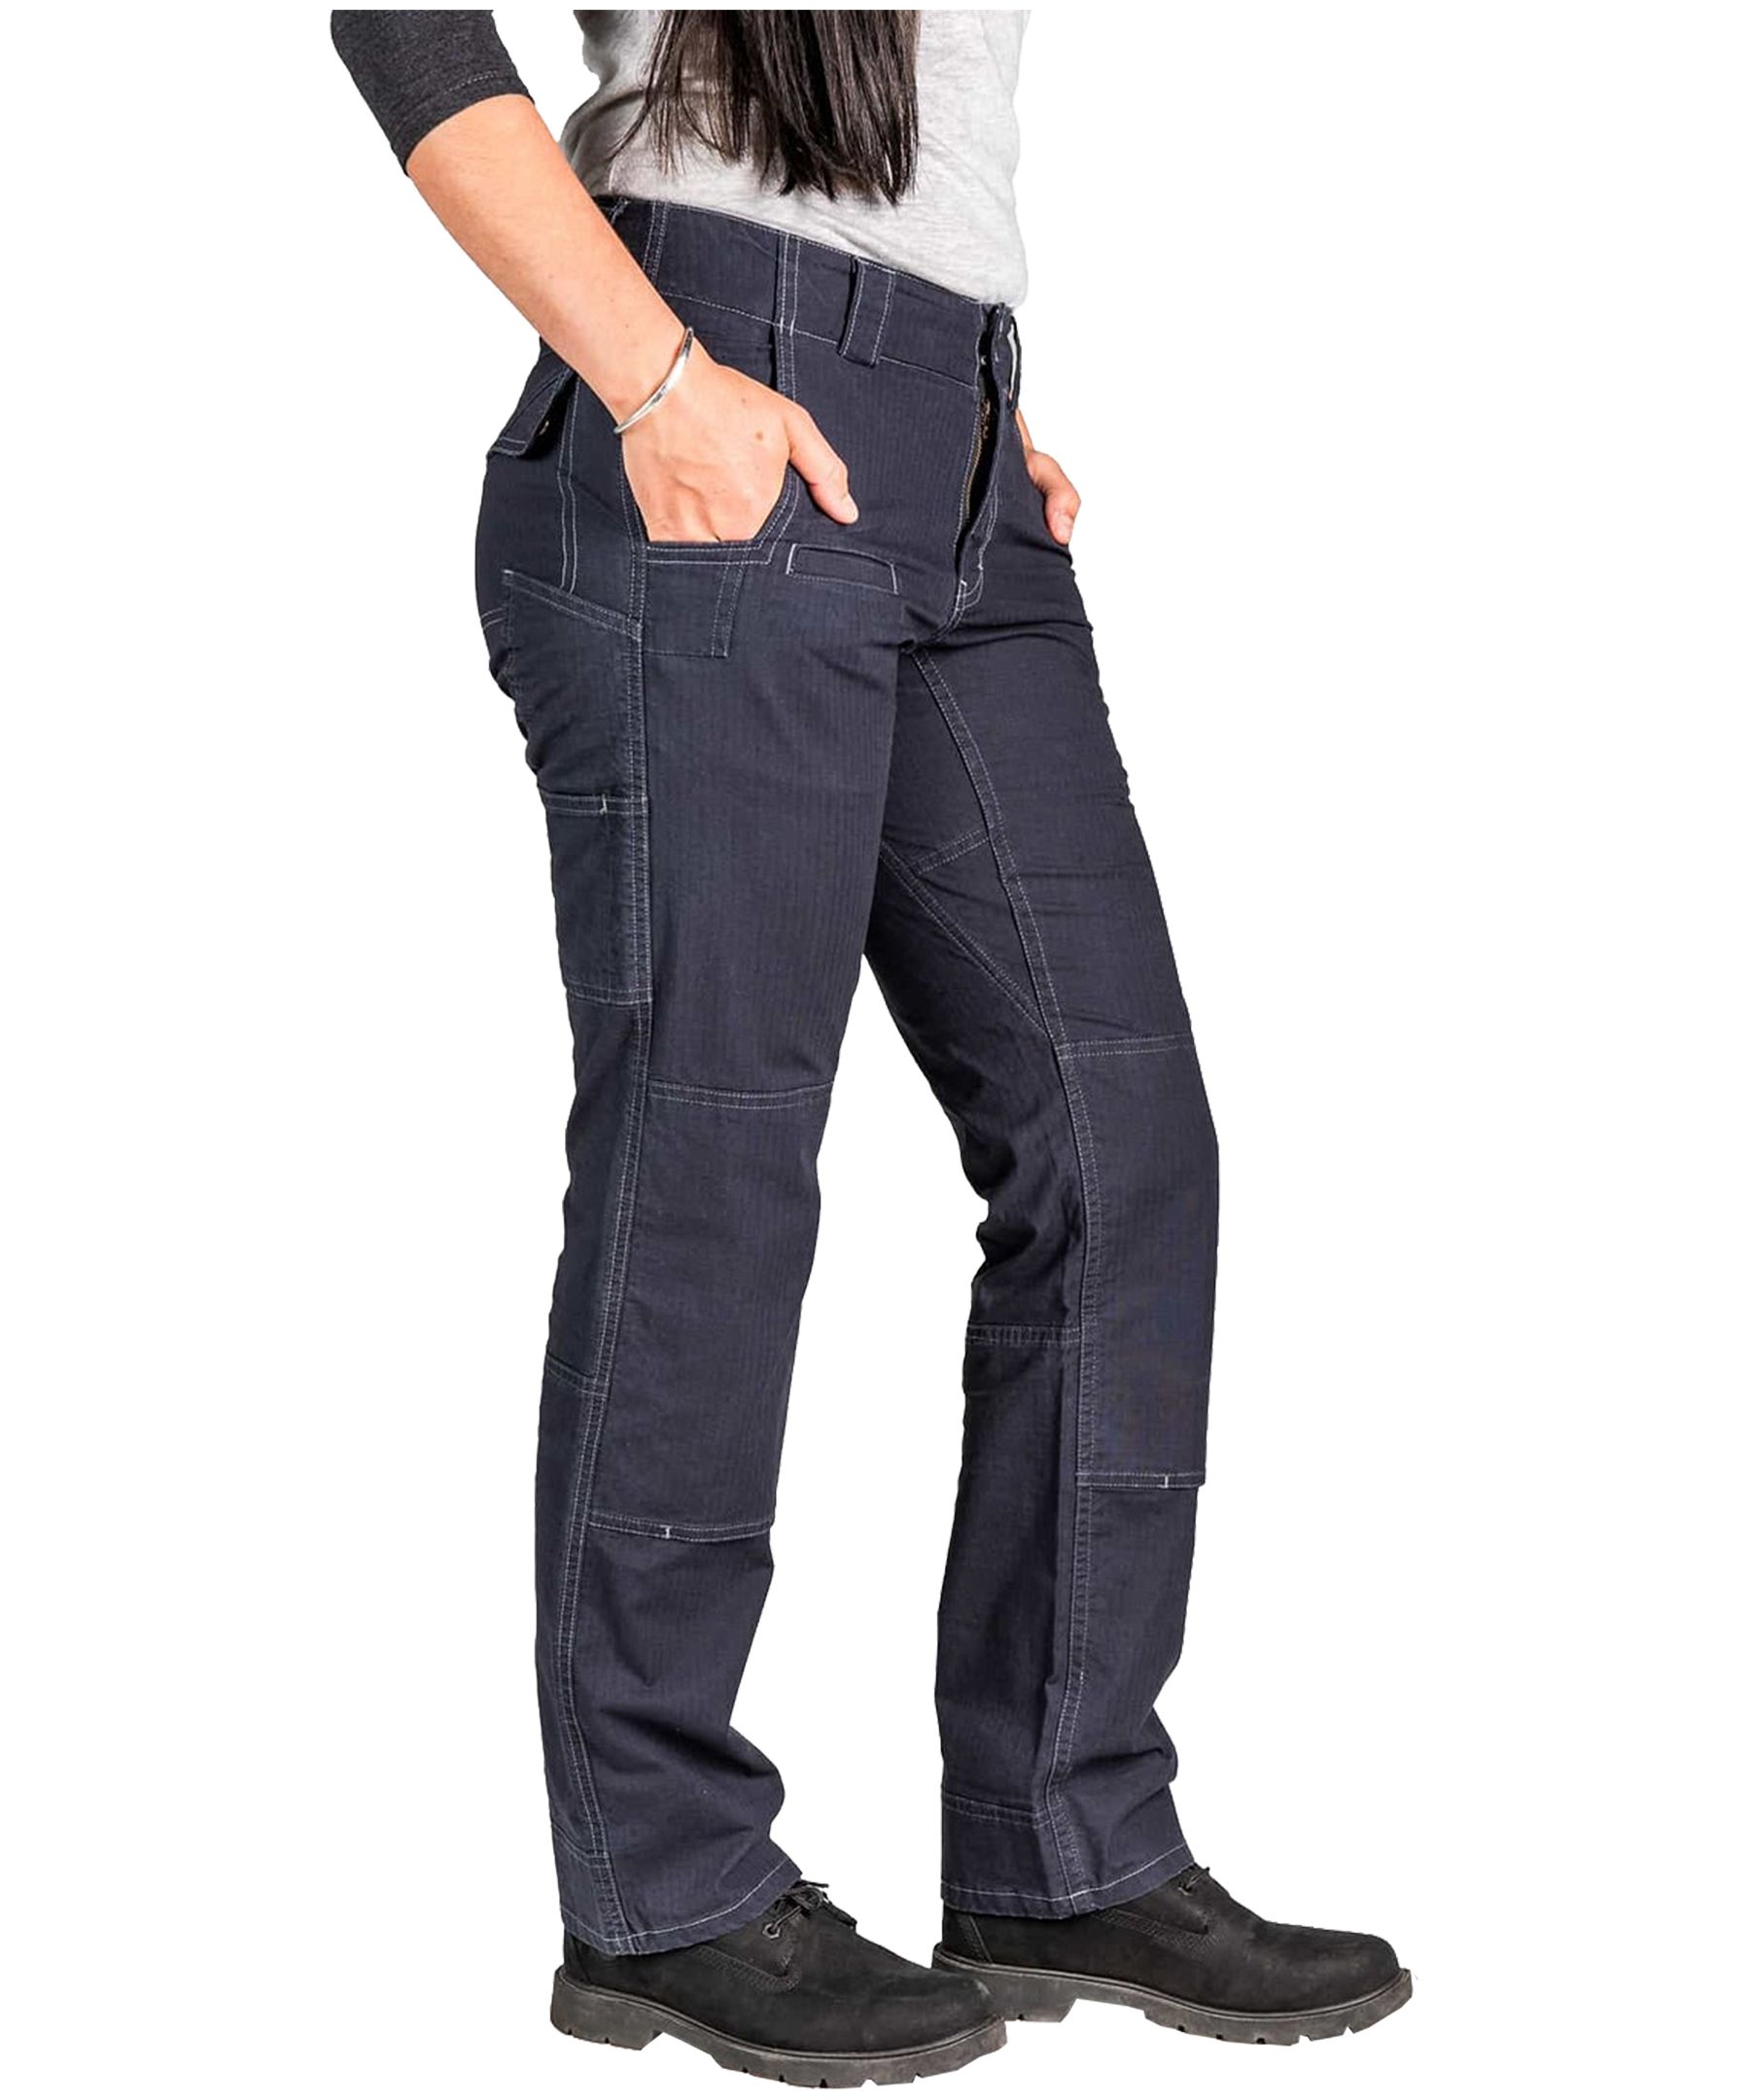 Dovetail Workwear Women's Reinforced Day Construction Work Pants